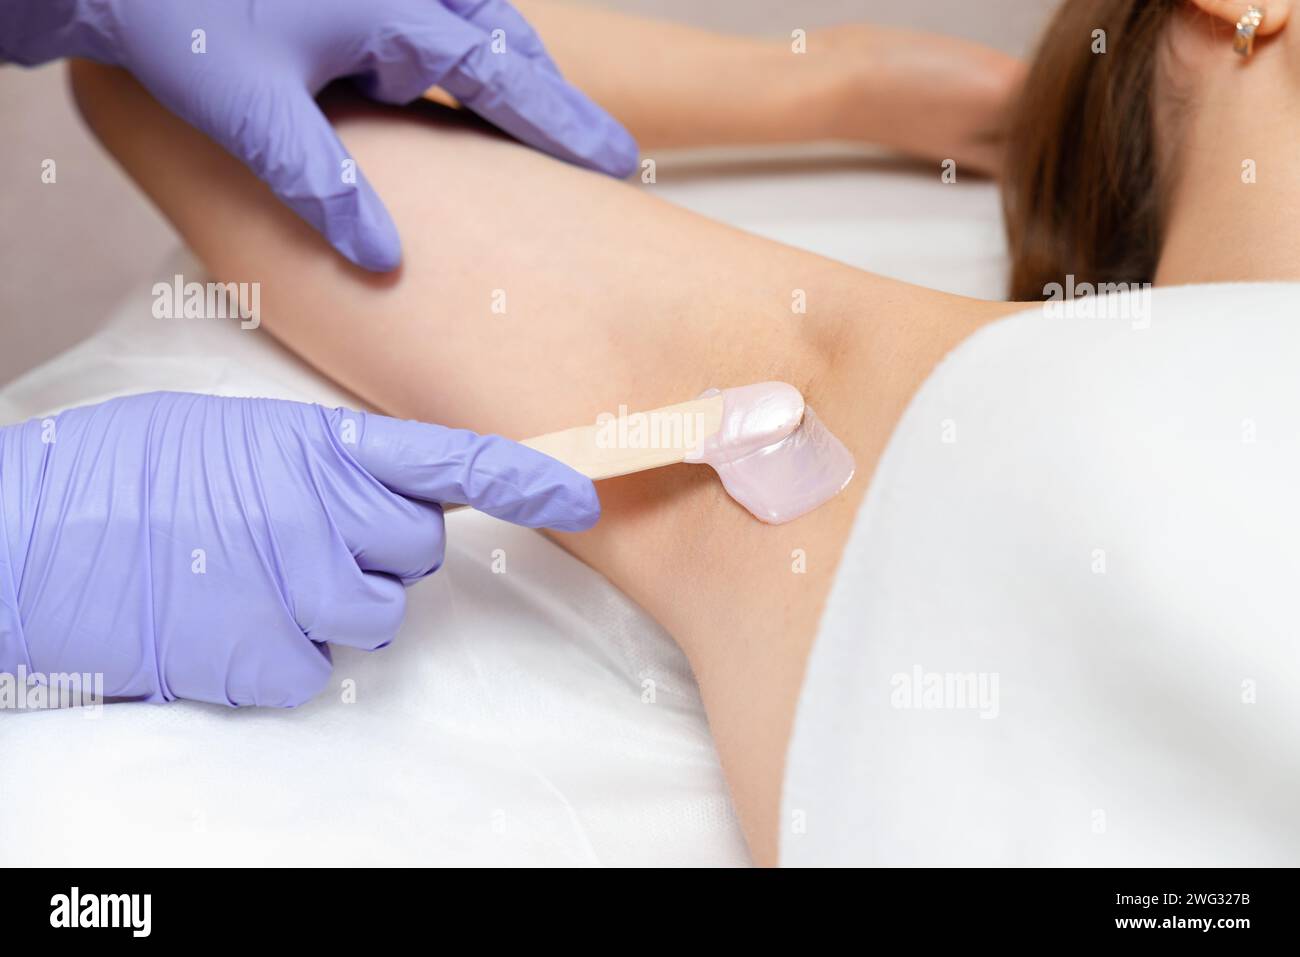 Armpit waxing procedure in a beauty salon. Master in gloves applies wax with a wooden spatula to a woman's armpit to remove hair. Body care concept. Stock Photo